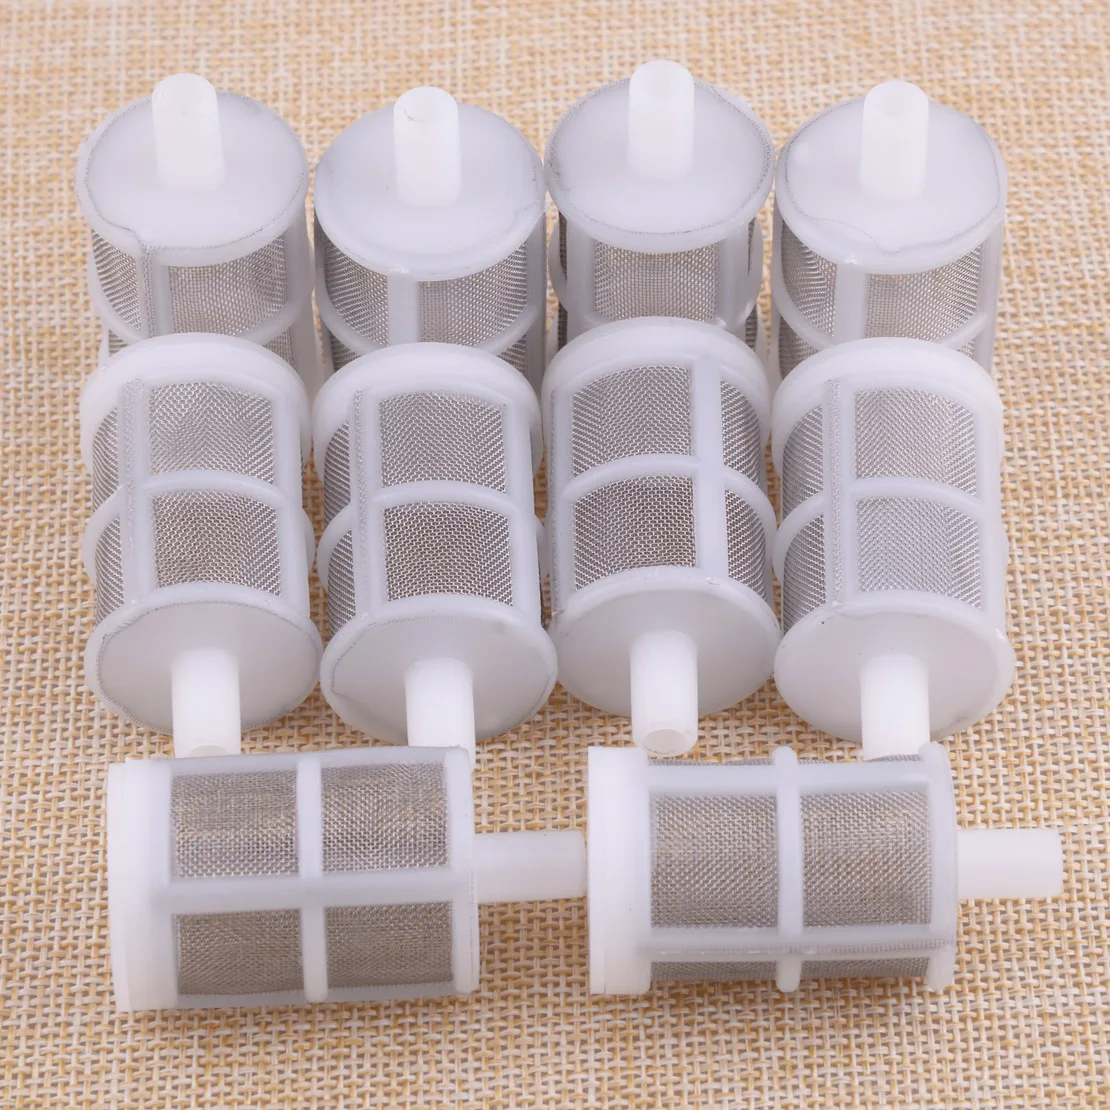 10x Stainless Steel Mesh Inching Siphon Filter Home Brew Beer Wine Making Tool 